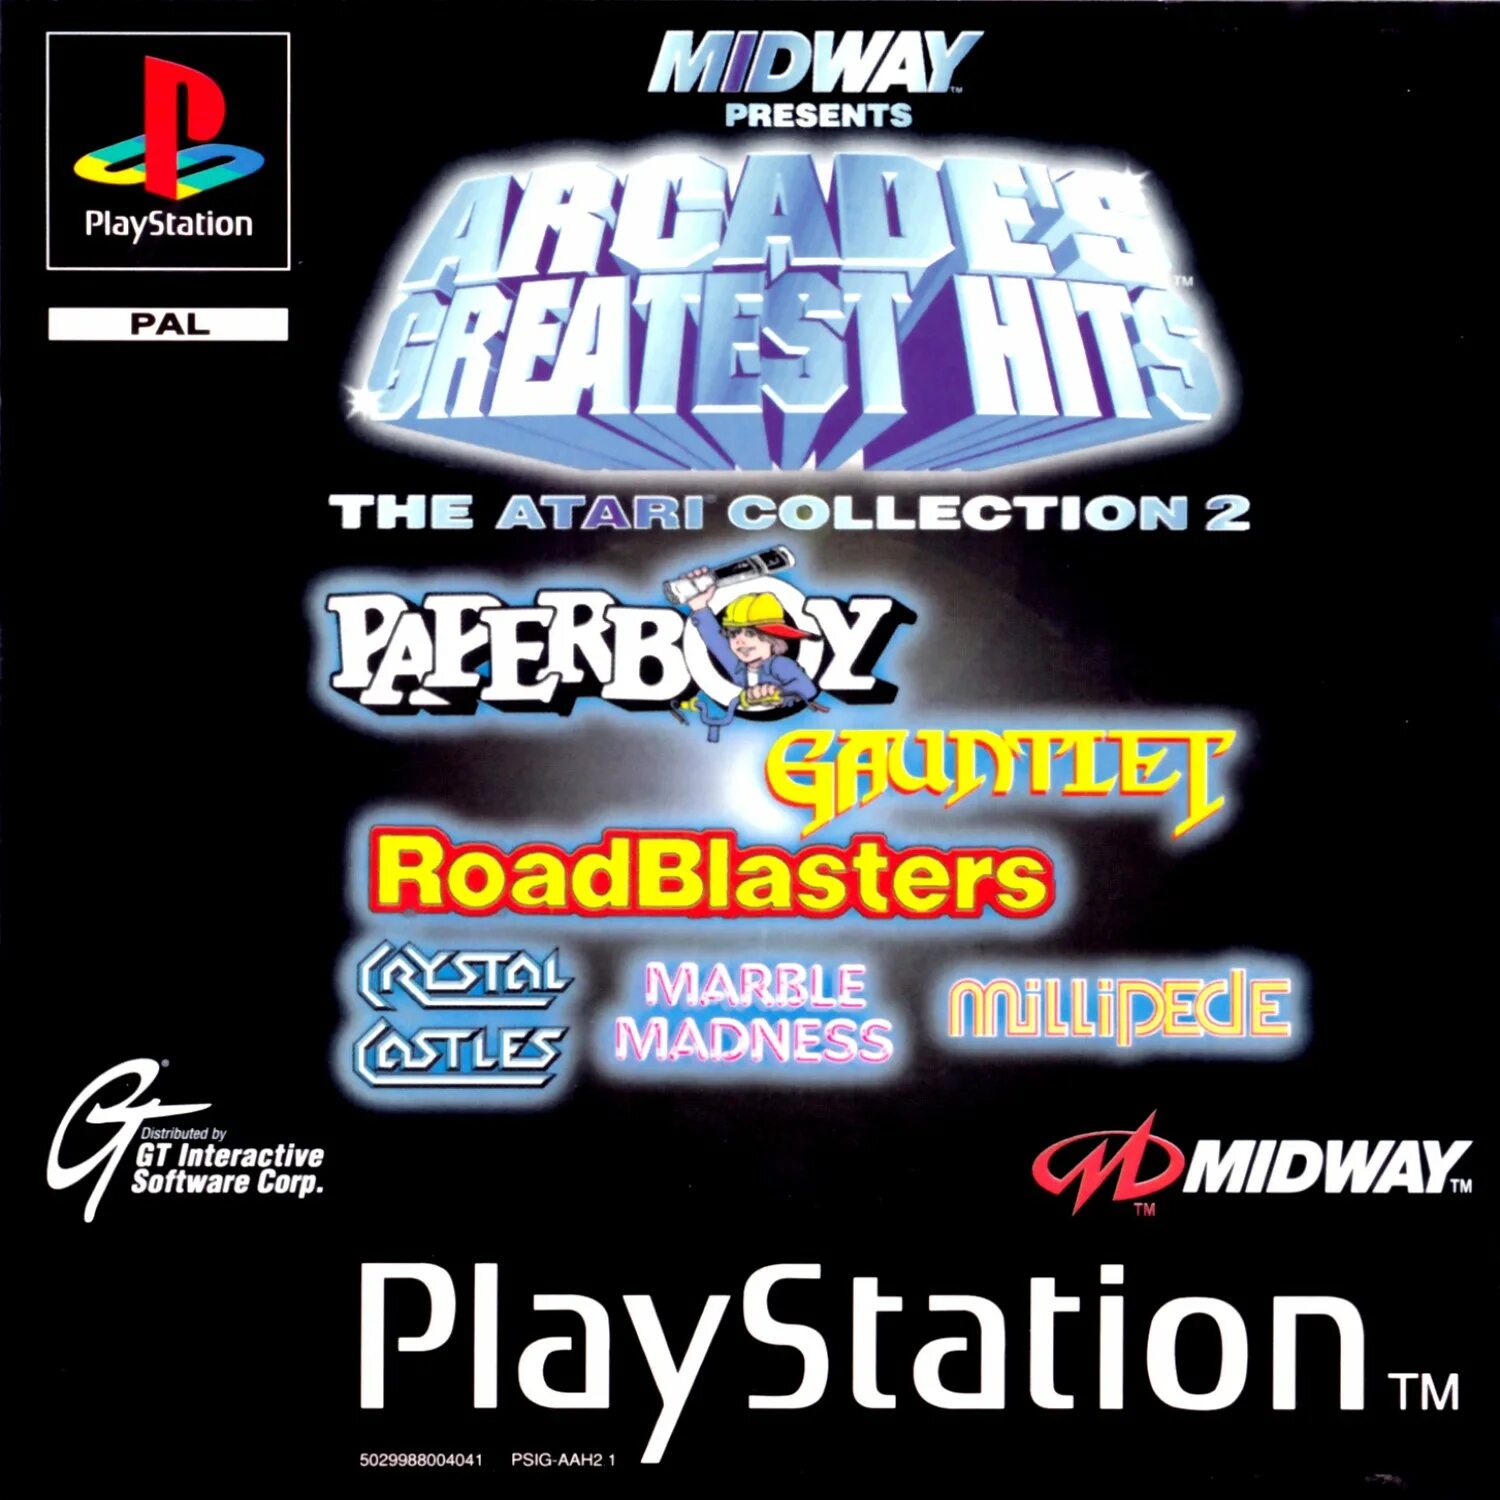 PLAYSTATION Greatest Hits игры. Аркадные игры ps1. Игра аркада на плейстейшен. Atari games ps2. Best collection 2